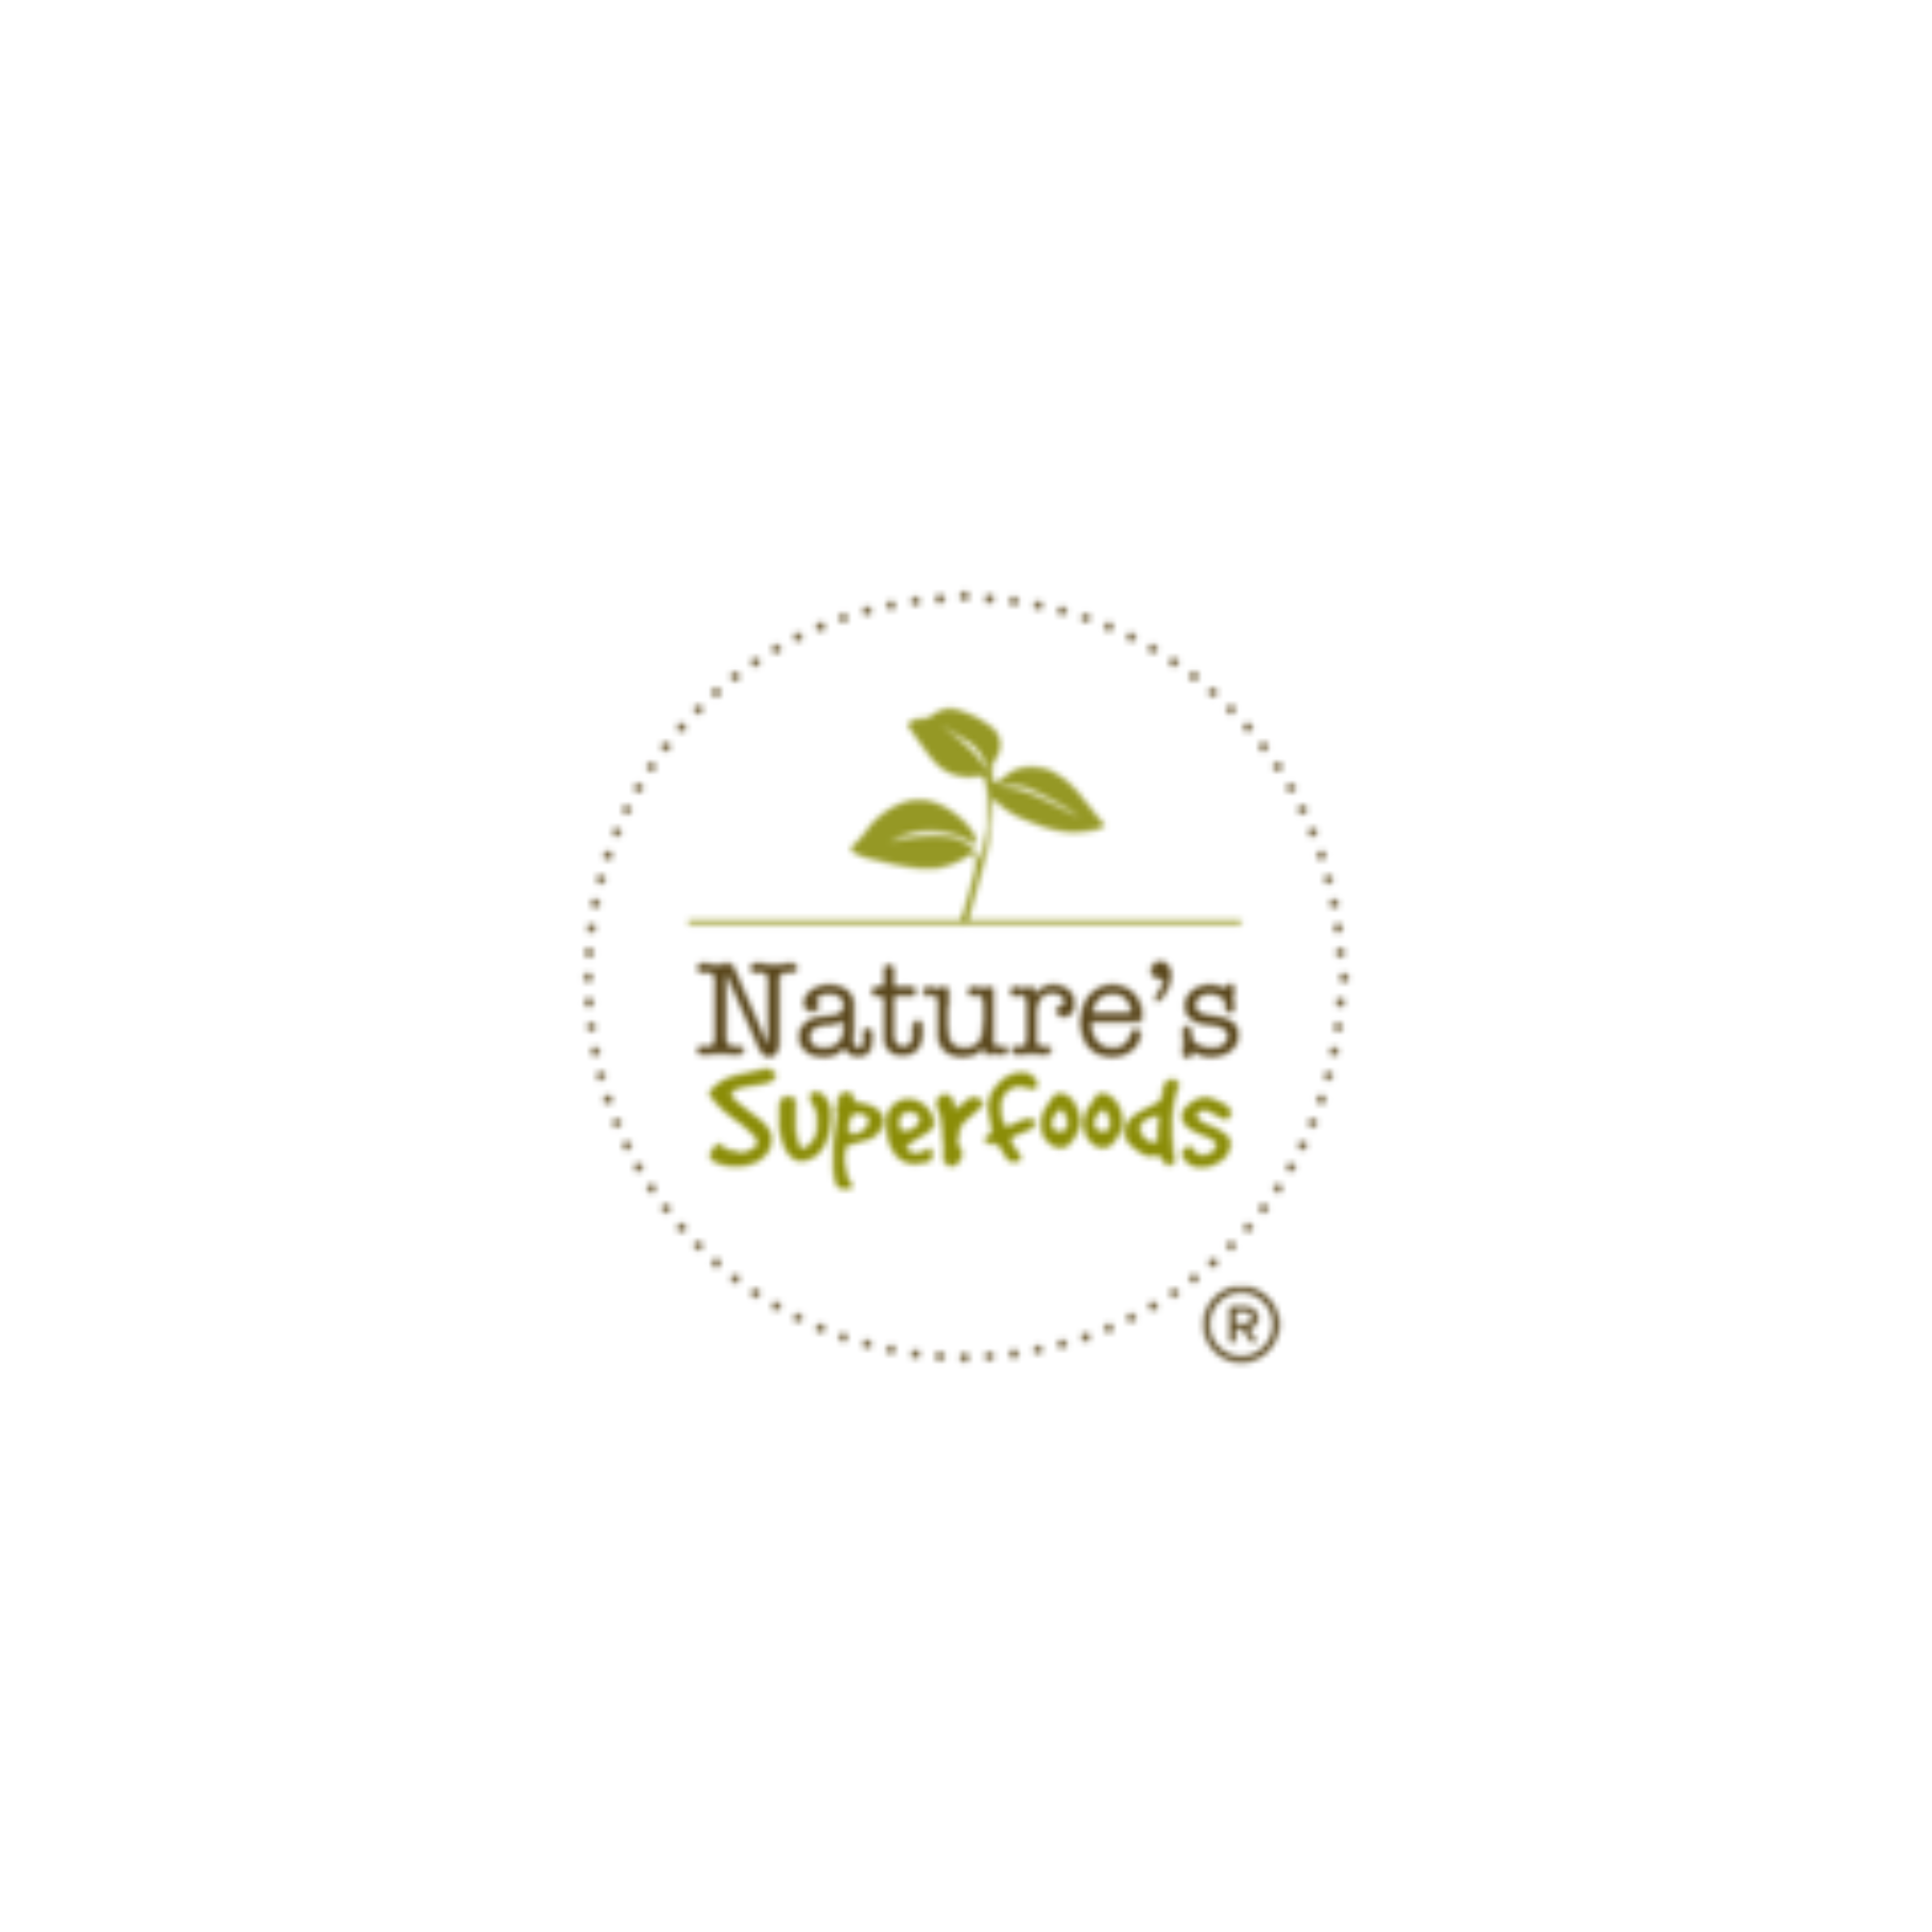 Nature's Superfoods LLP